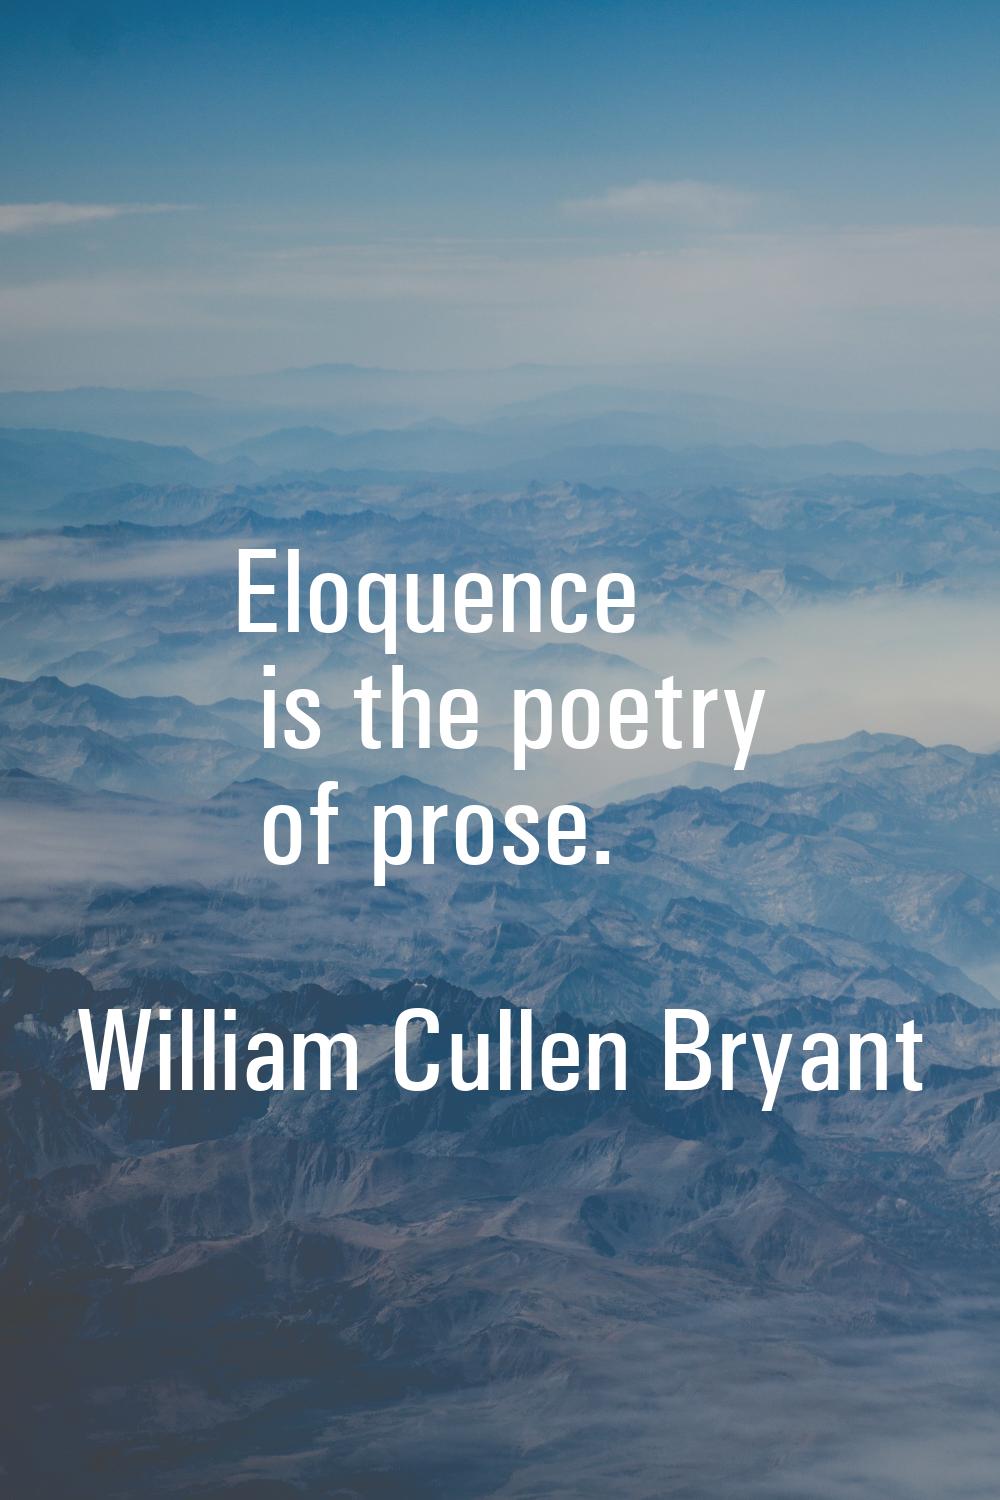 Eloquence is the poetry of prose.